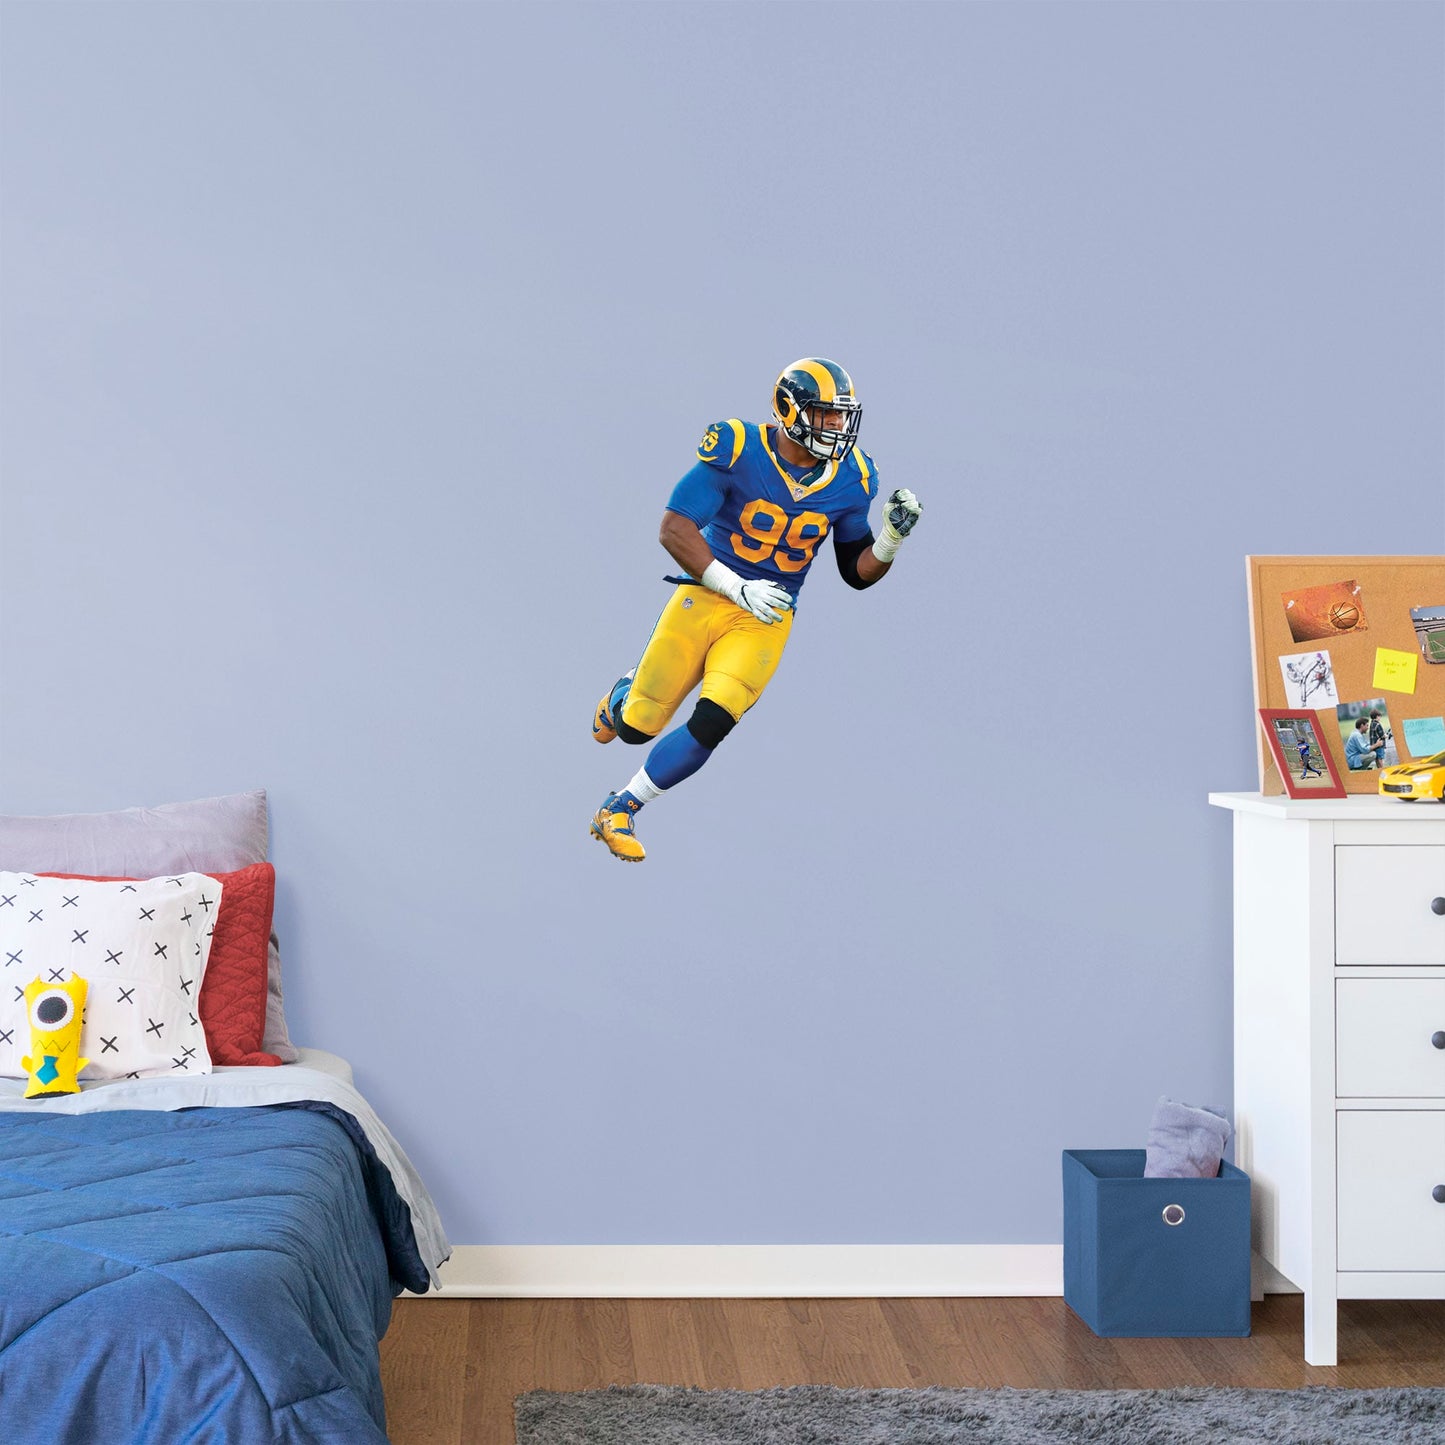 X-Large Athlete + 2 Decals (25"W x 38"H) Ever wish you could meet Aaron Donald, one of the greatest defensive tackles in football history? Show your Los Angeles Rams team spirit with a life-size wall decal of the former Pittsburgh player once recognized as a unanimous All-American draft pick. Officially licensed by the NFL, this removable, high-quality Aaron Donald Throwback Jersey decal will show your Rams pride like no poster can.